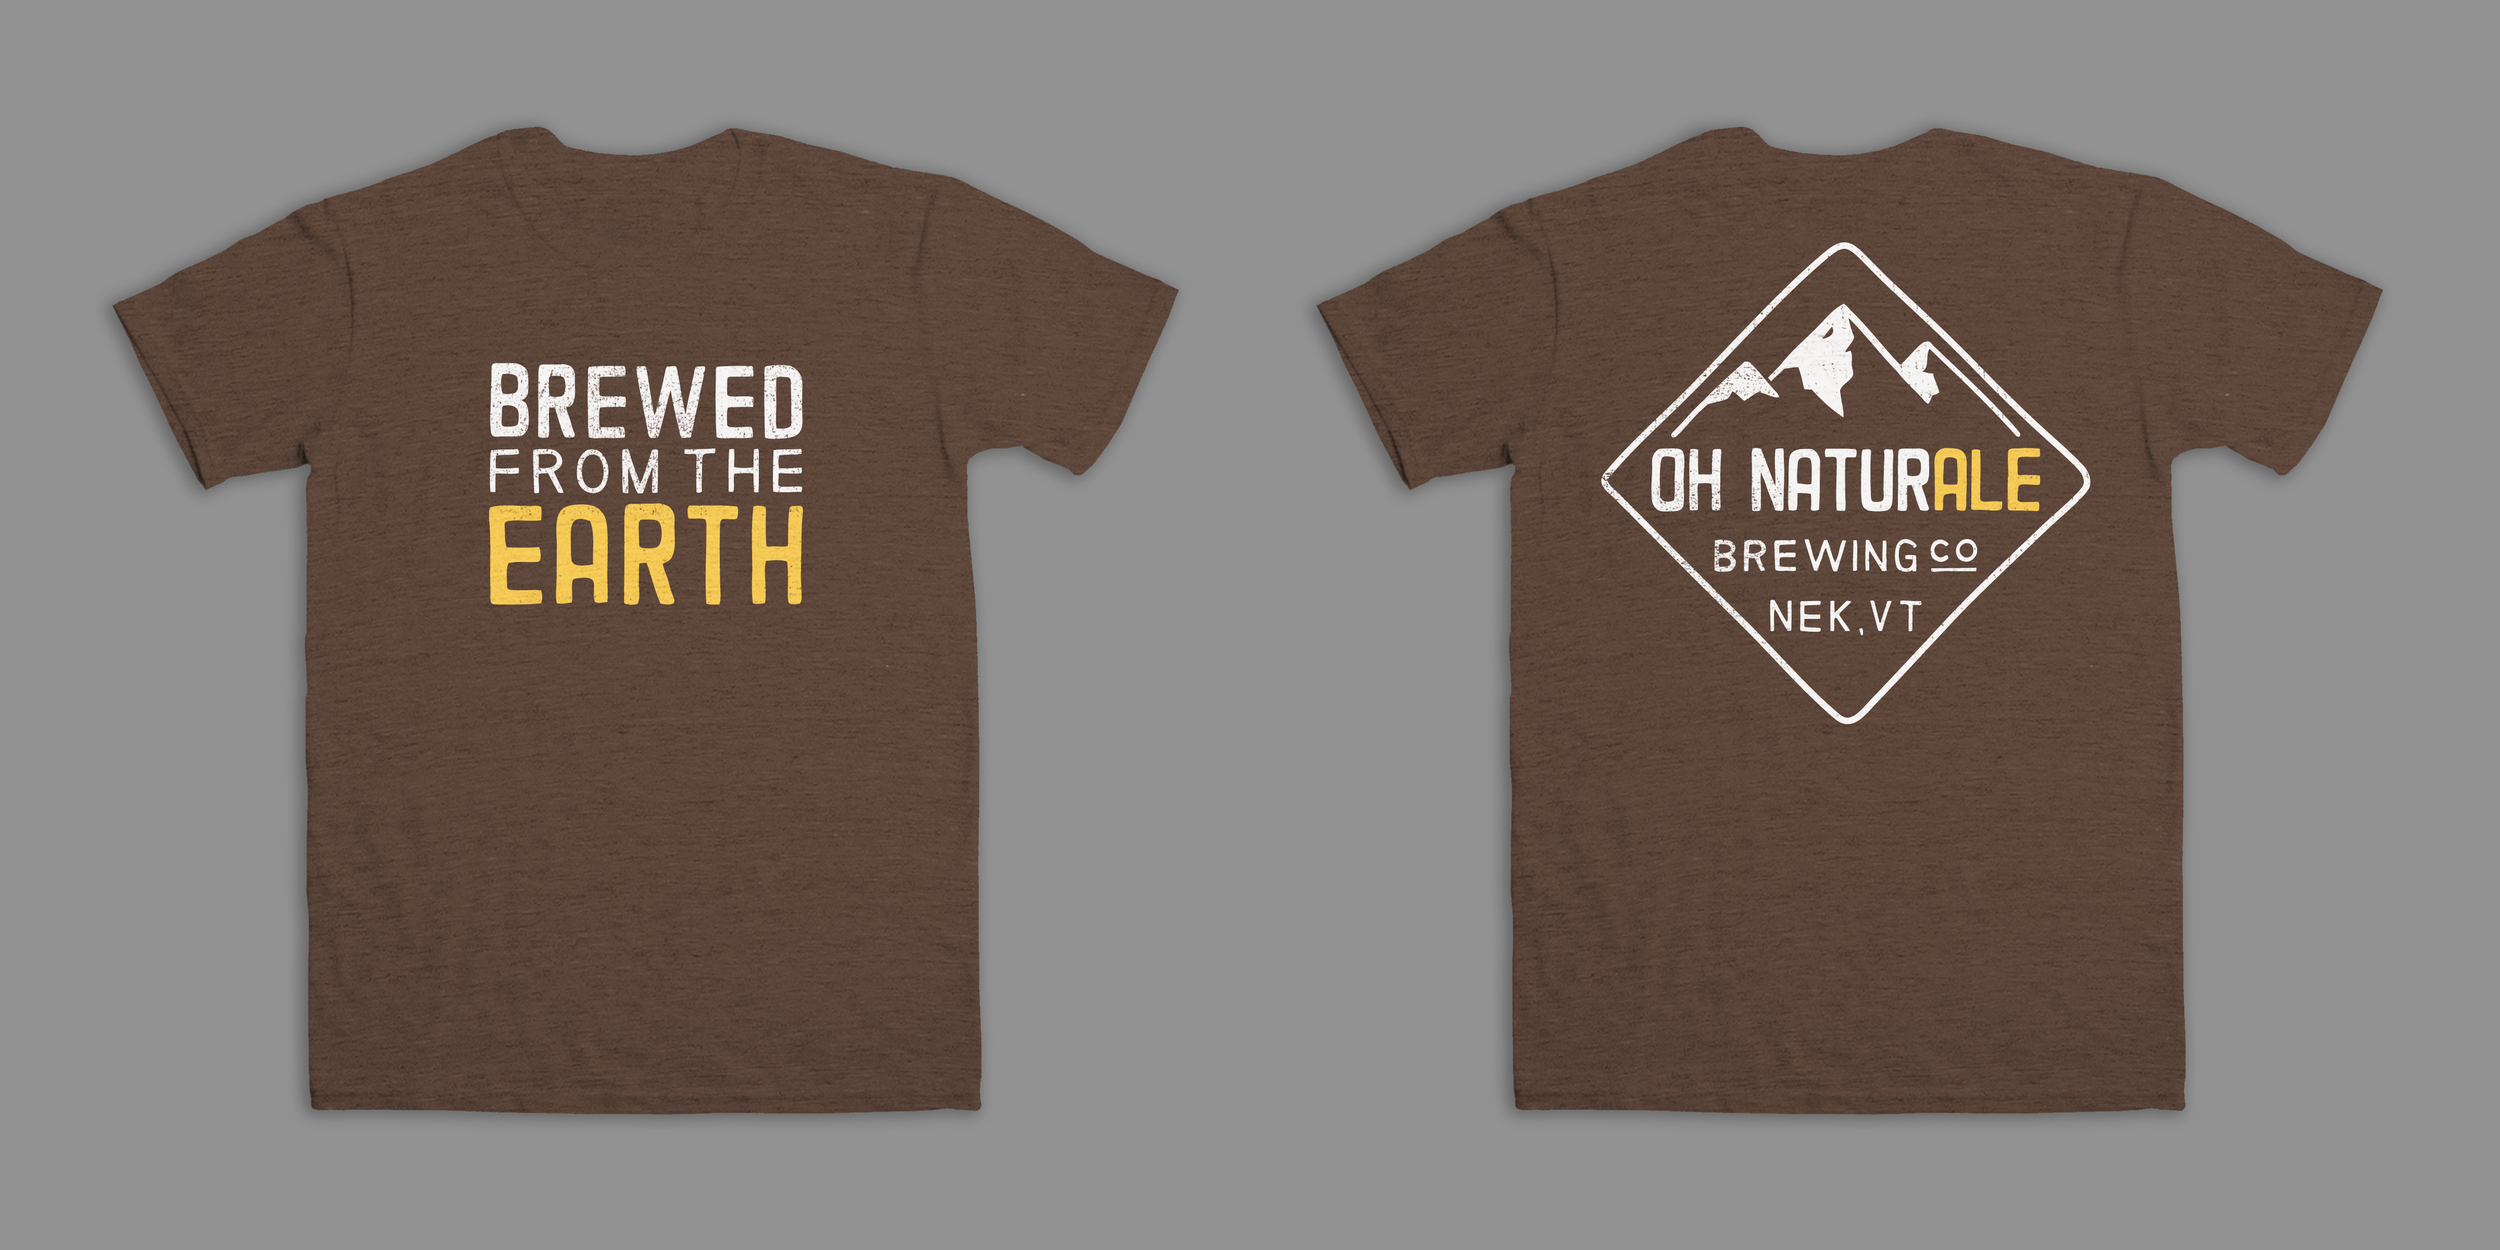 Oh Naturale Brewery Shirt